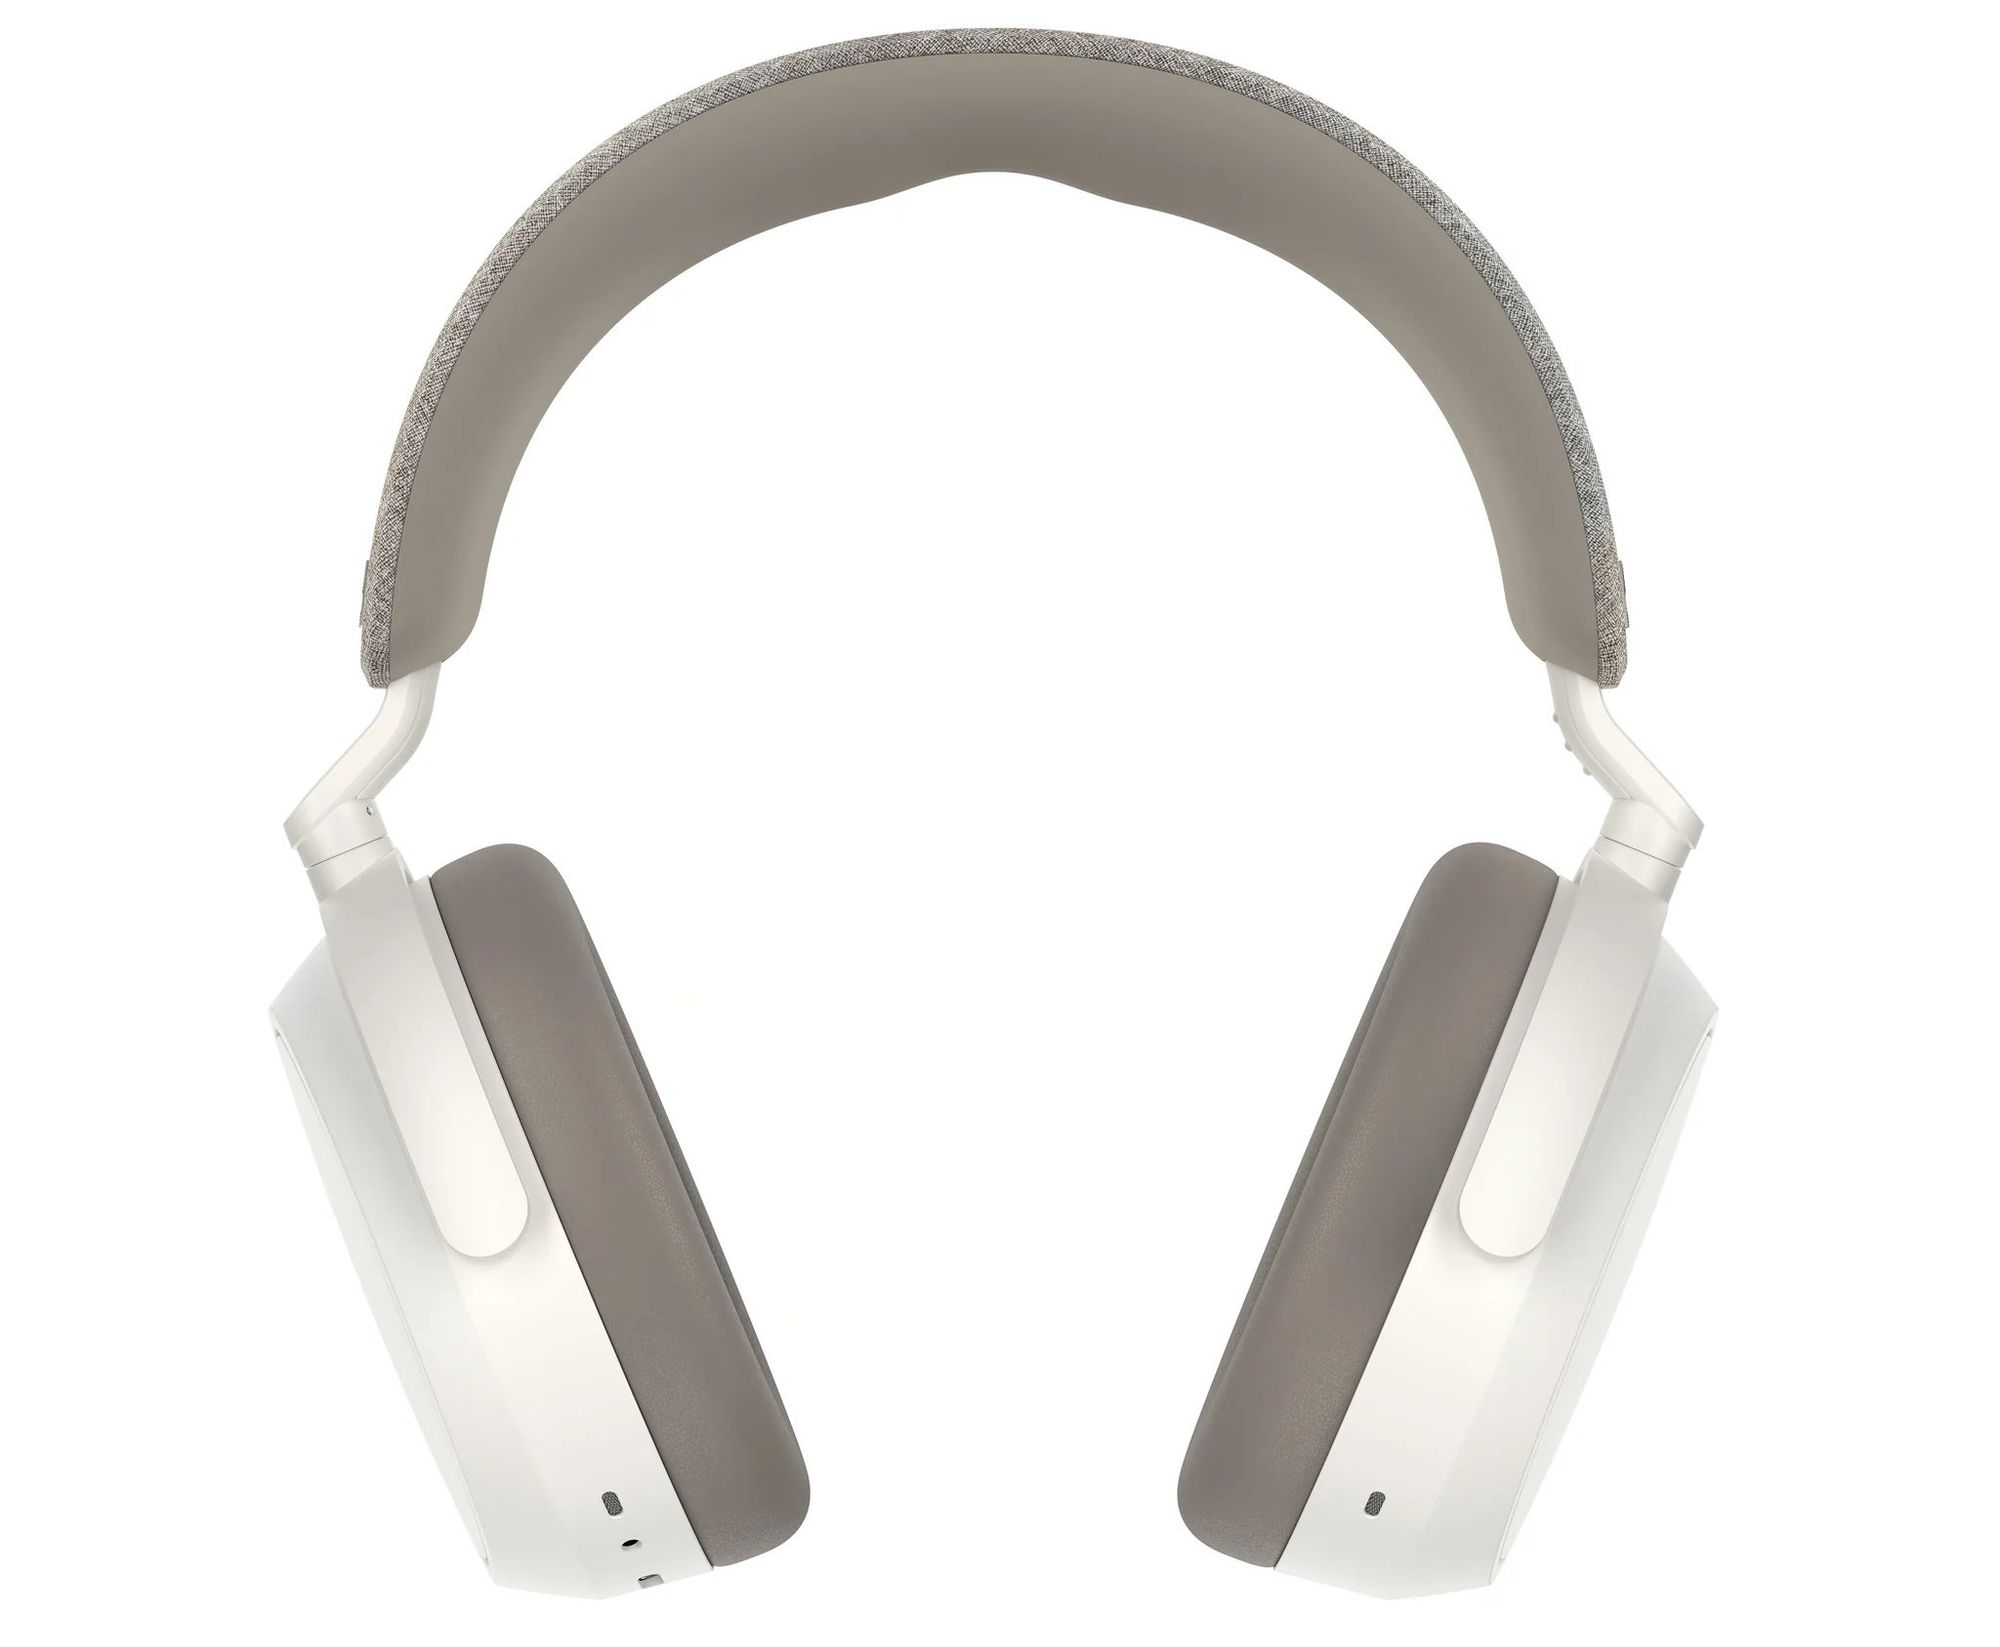 Sennheiser MOMENTUM 4 Review. They're Amazing! - Babbling Boolean